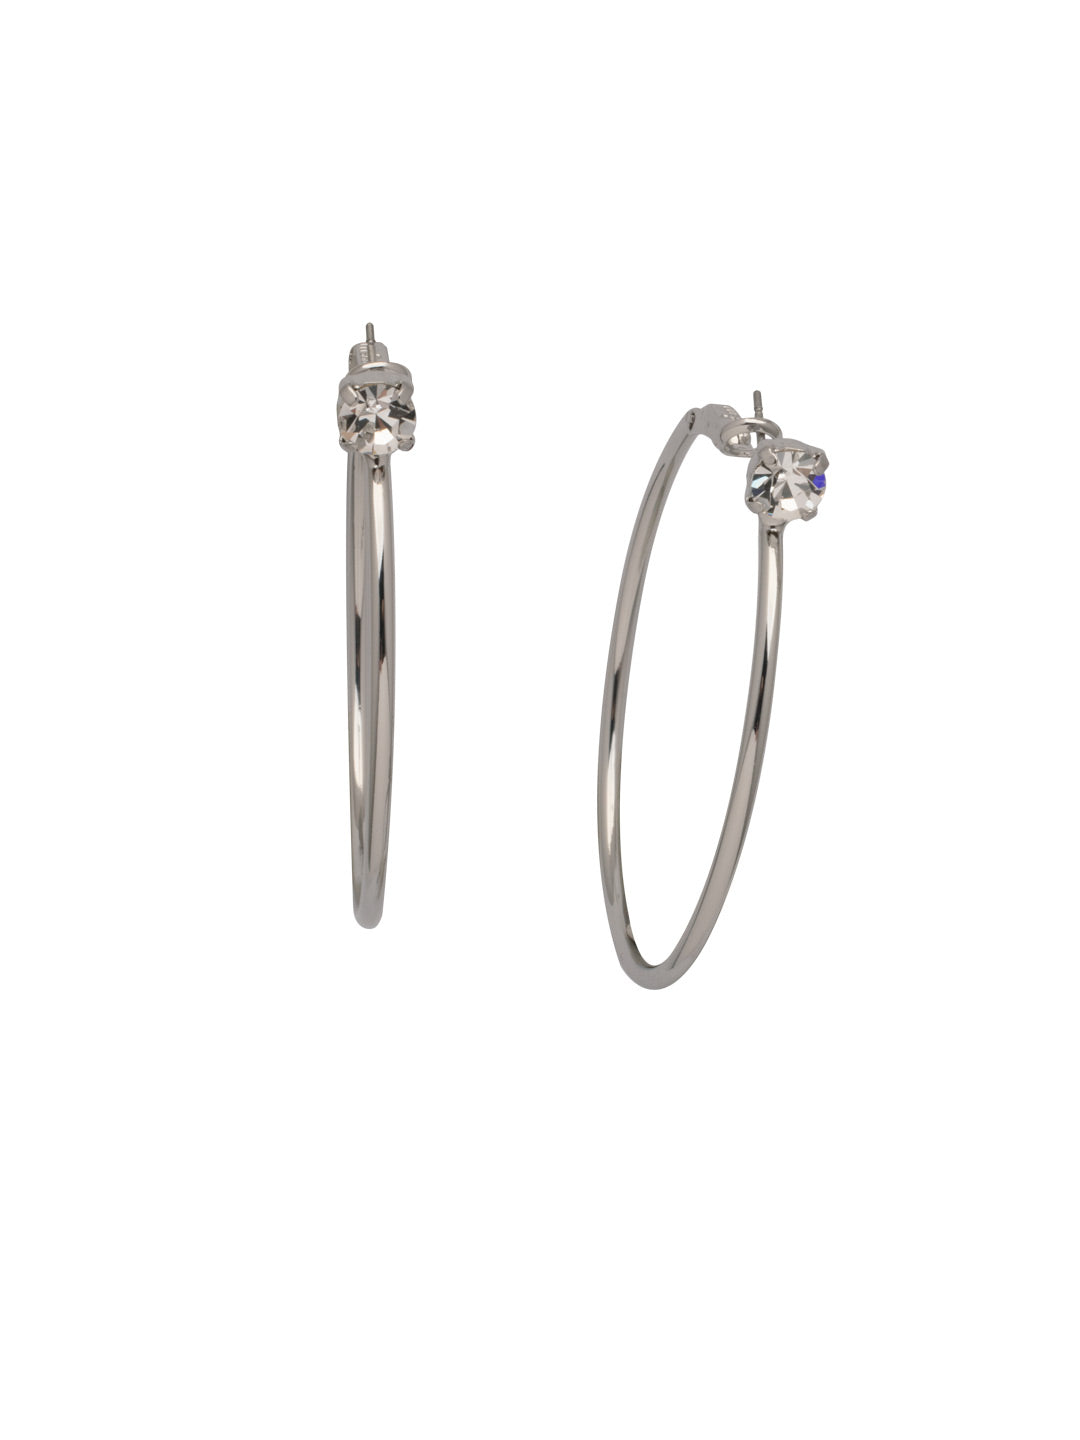 Serafina Hoop Earrings - EEP41PDCRY - <p>Take the classic metal hoop up a notch with the Serafina Hoop Earring. Starting with a single crystal sparkler, it's got that extra something special. From Sorrelli's Crystal collection in our Palladium finish.</p>